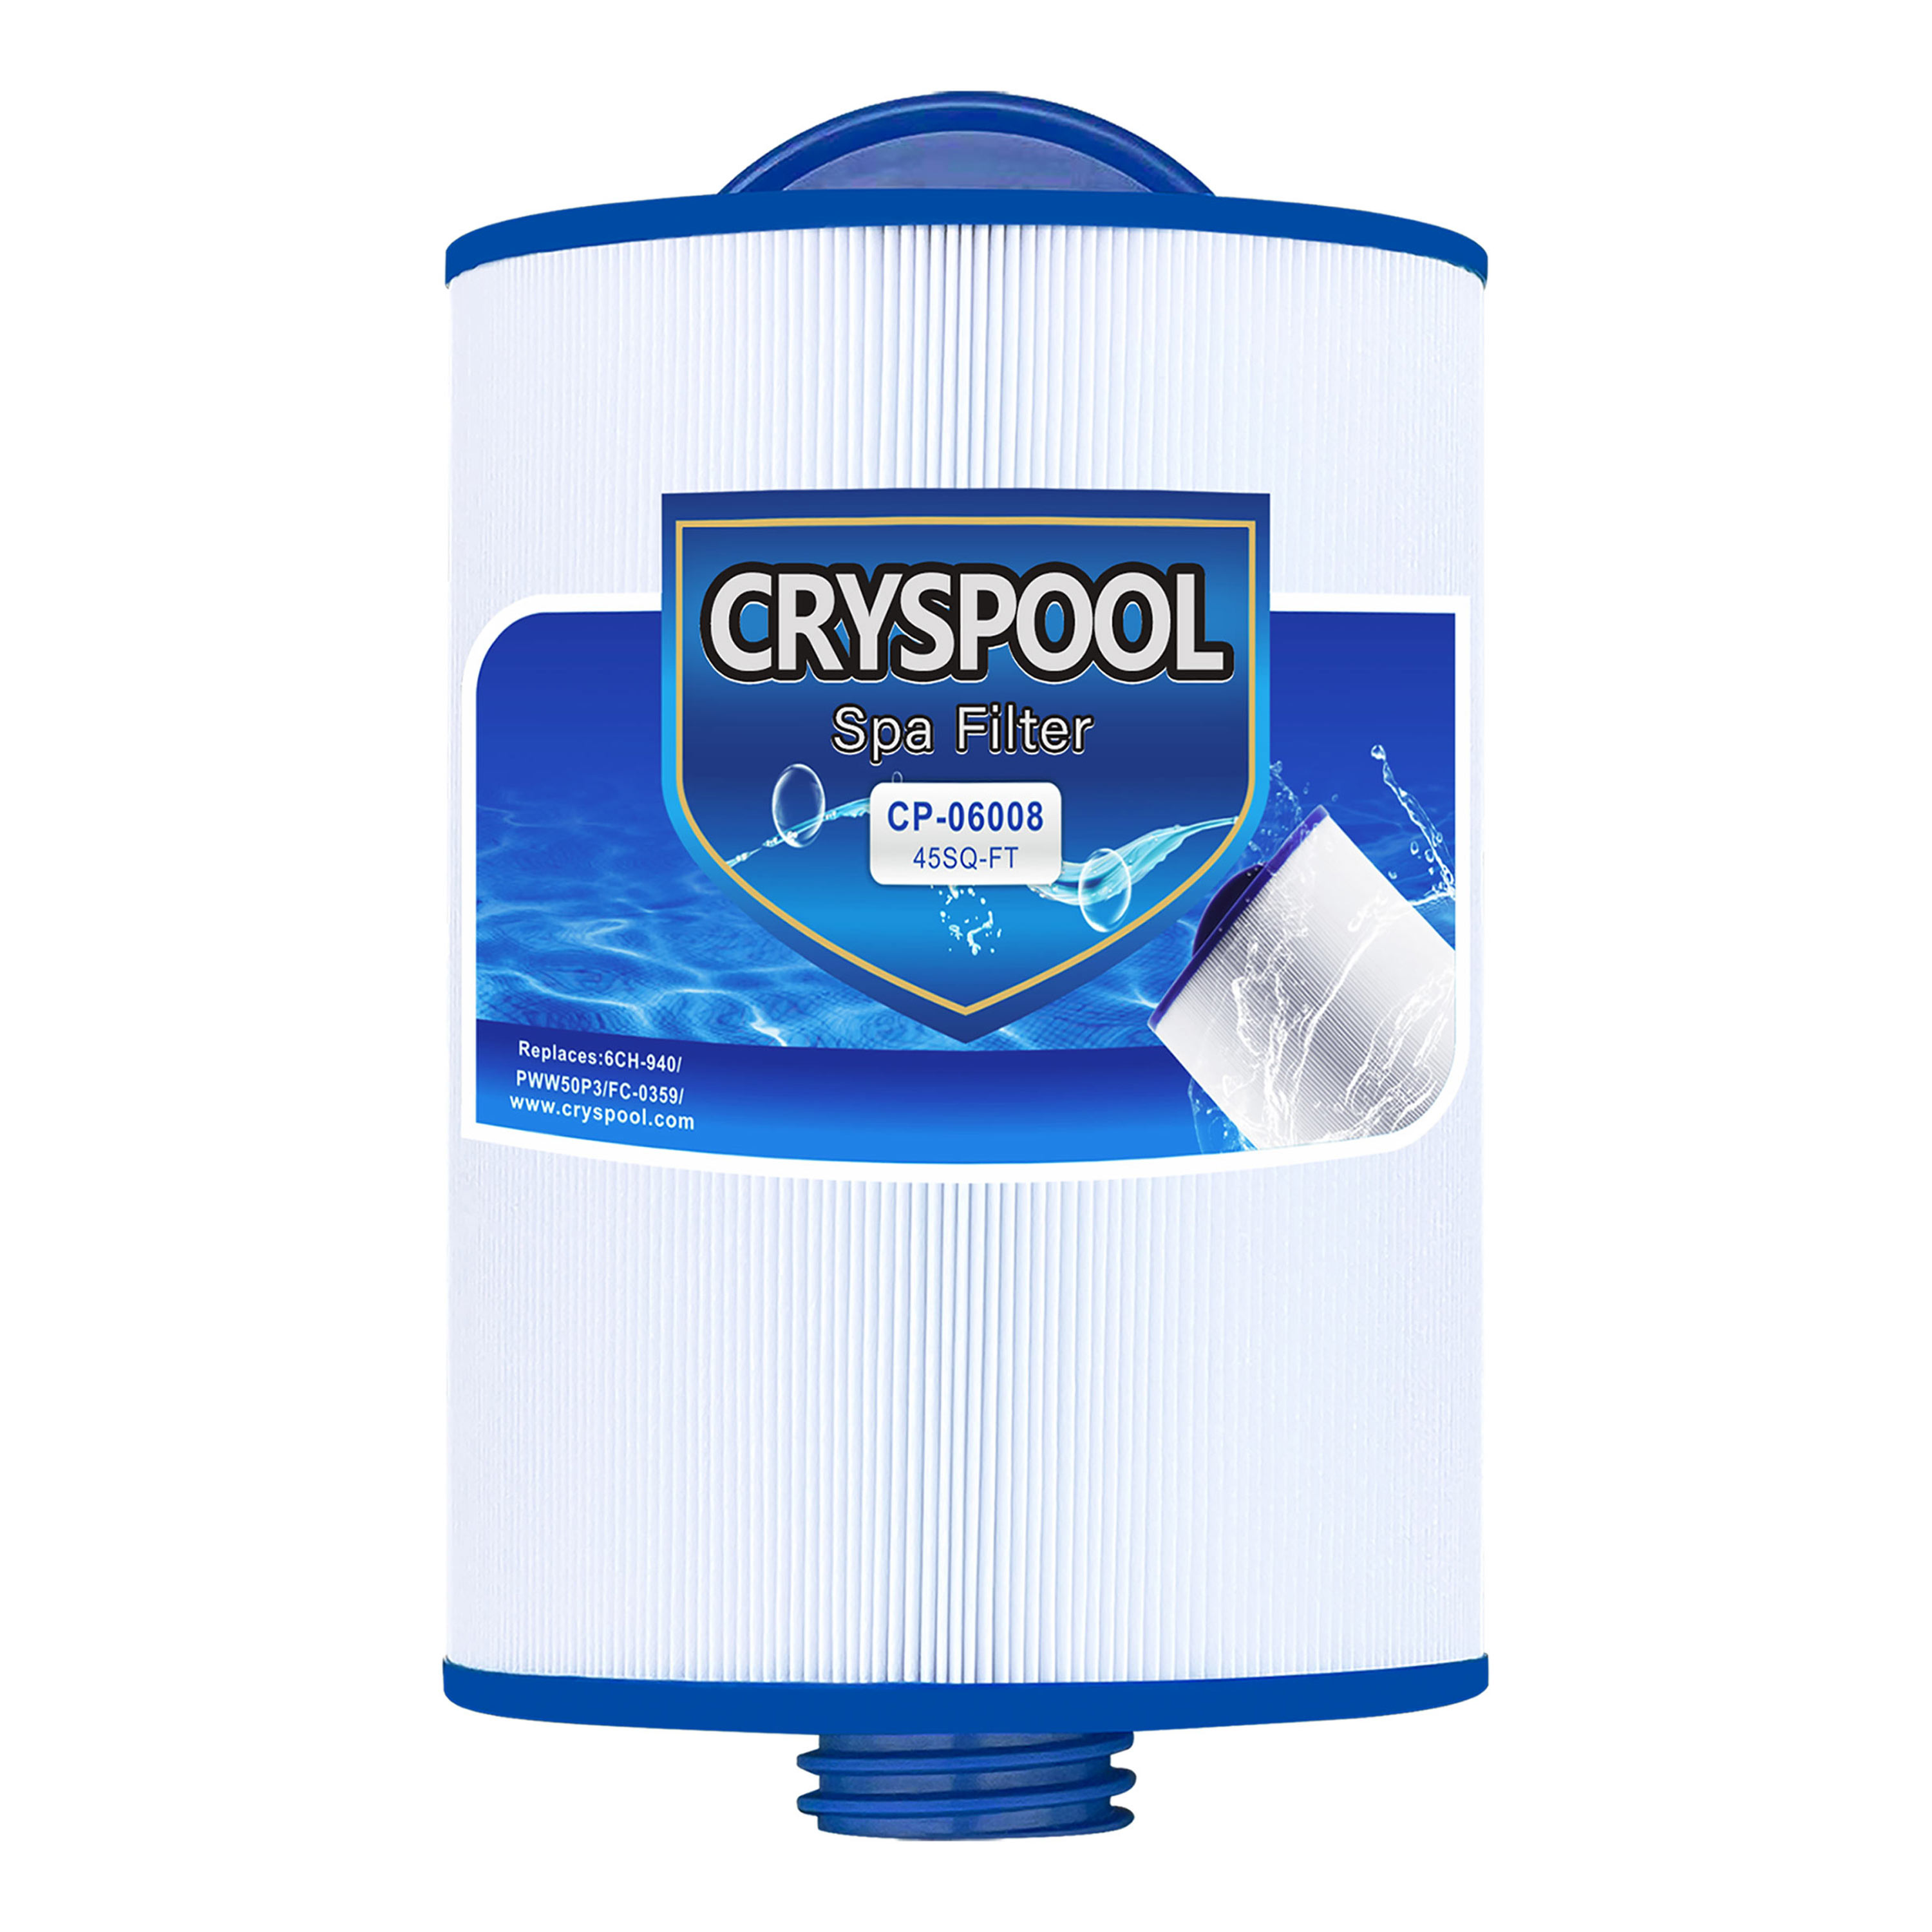 Cryspool Coarse-Thread Spa Filter Replaces 6CH-940, PWW50P3 (NOT PWW50P4), Filbur FC-0359, Waterway Vita Aber,Viking Spa Hot Tub Filter, 45 Sq.Ft. Featured Image